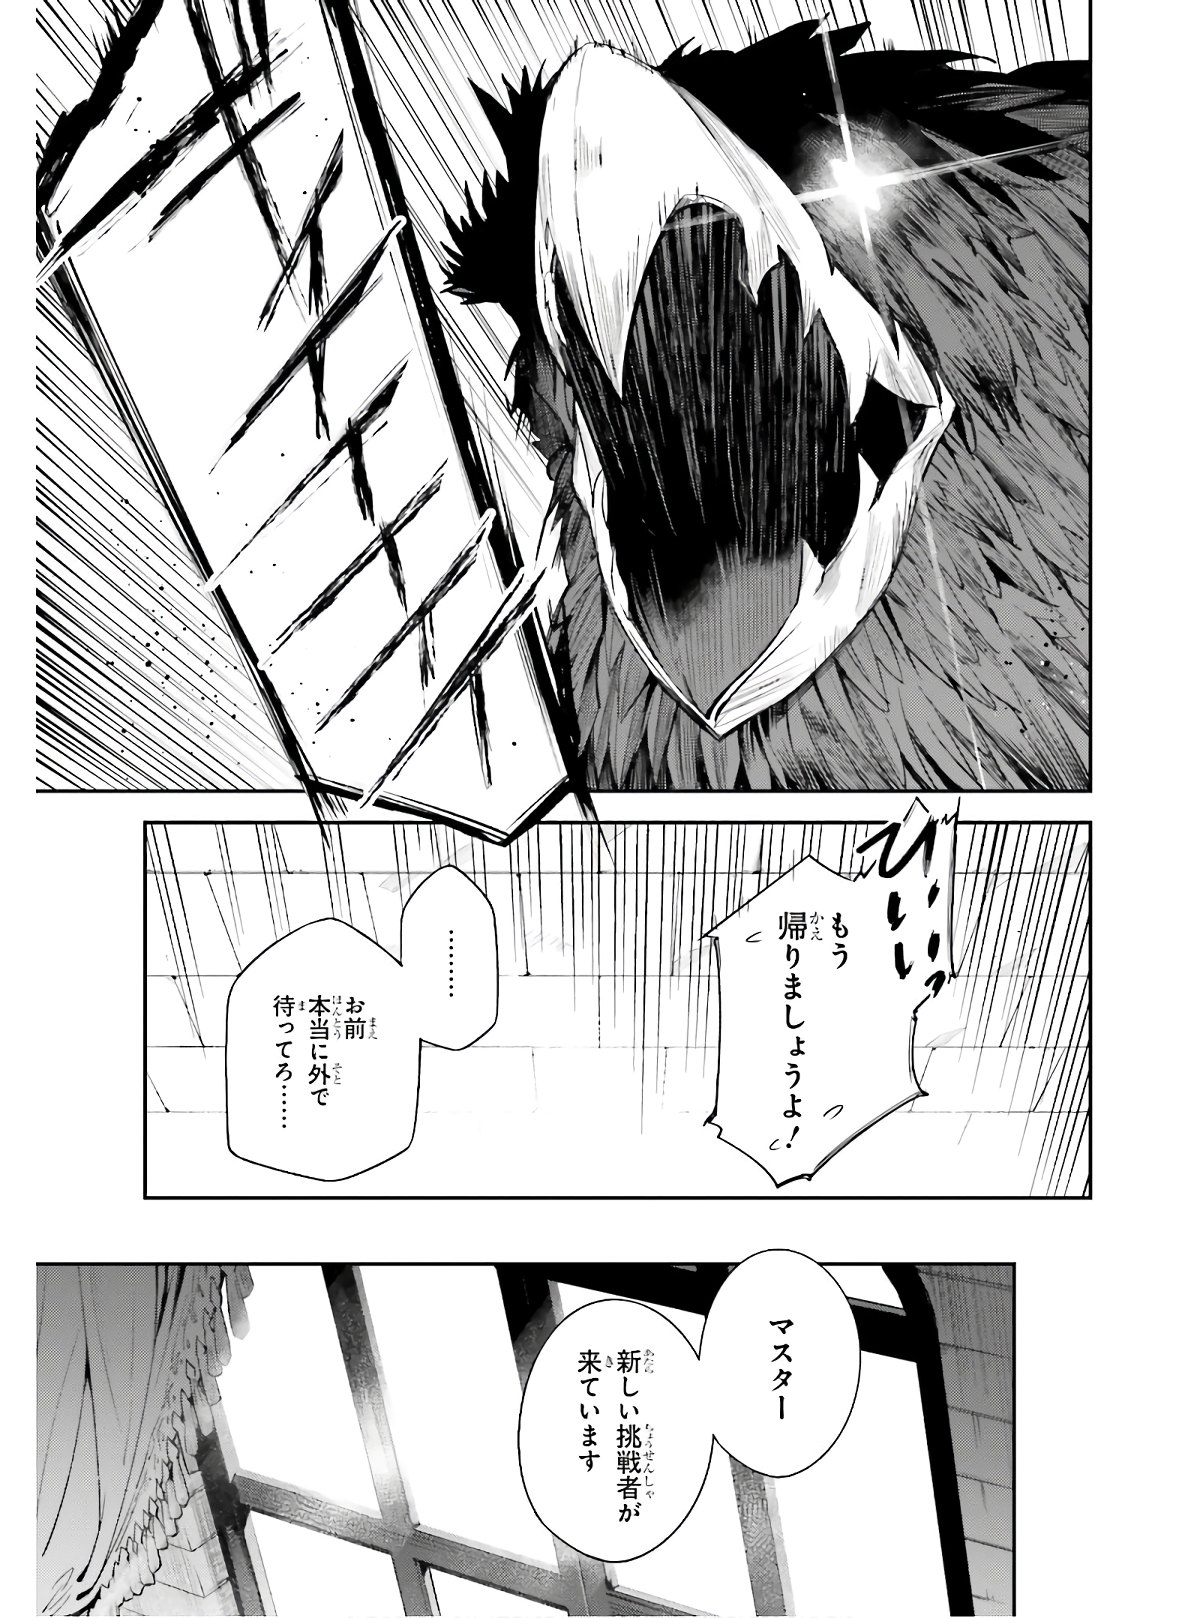 Unnamed Memory 第1話 - Page 11